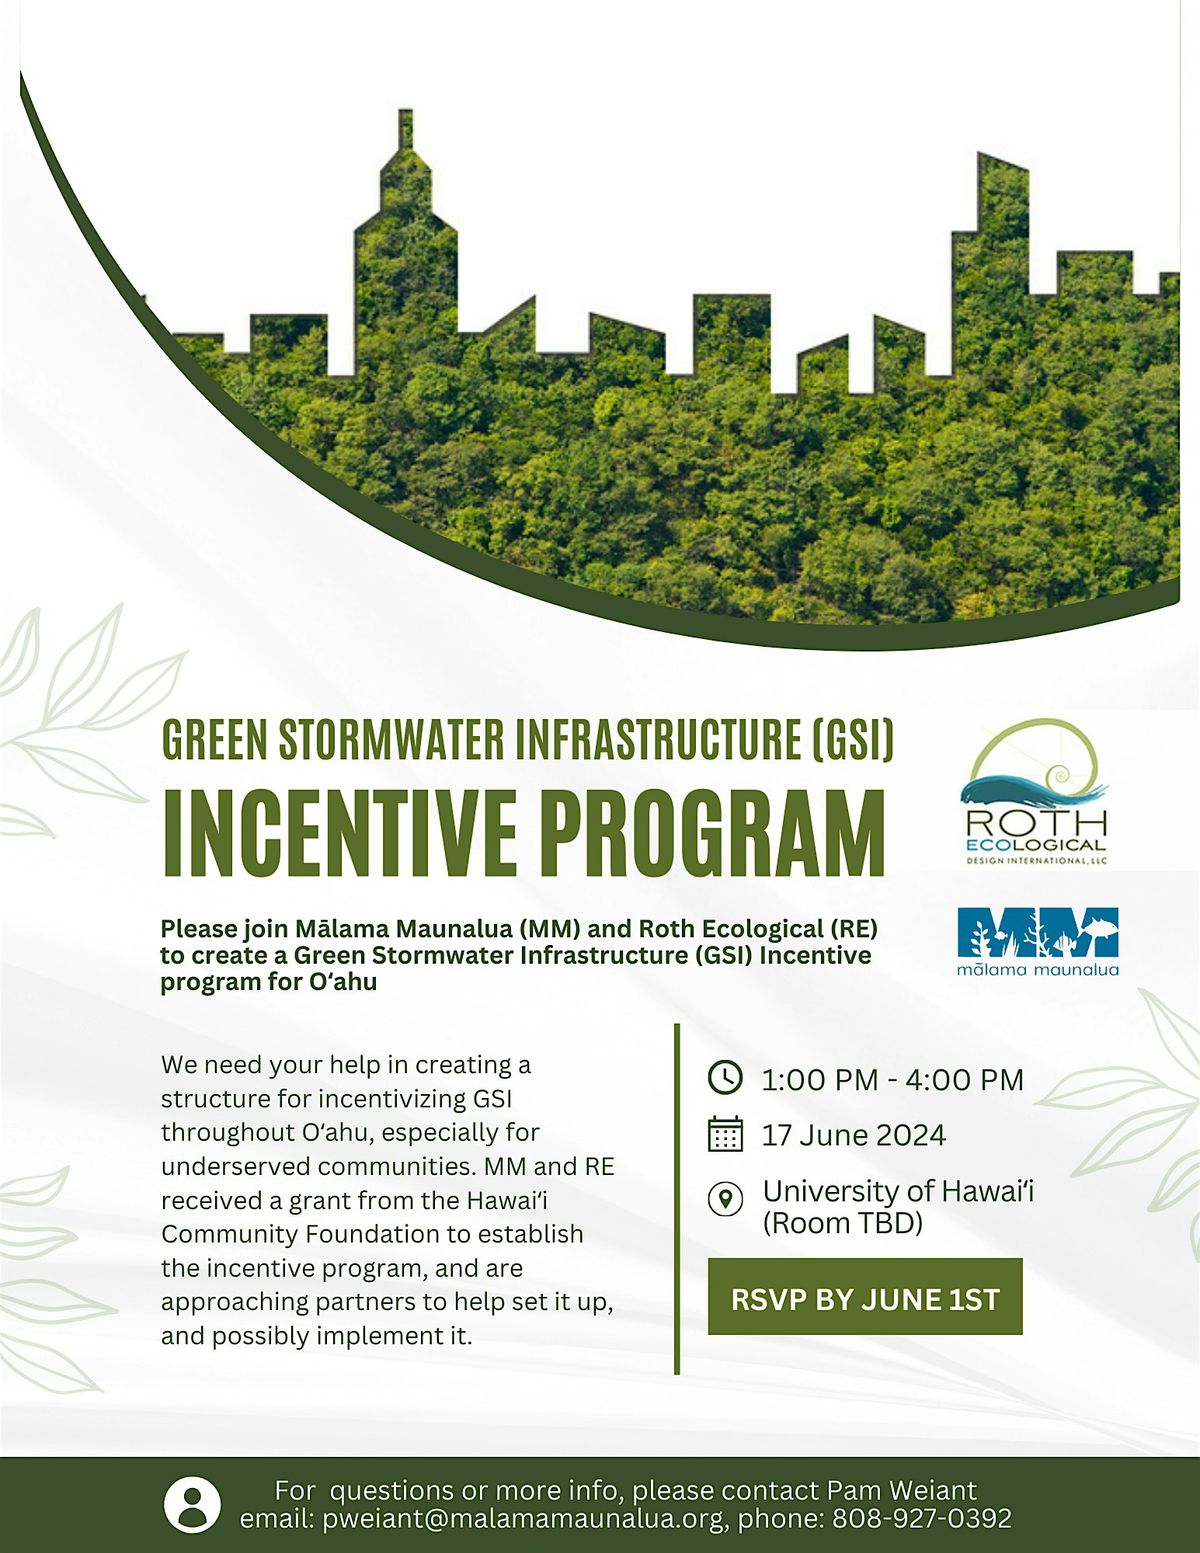 Green Stormwater Infrastructure (GSI) Incentive program